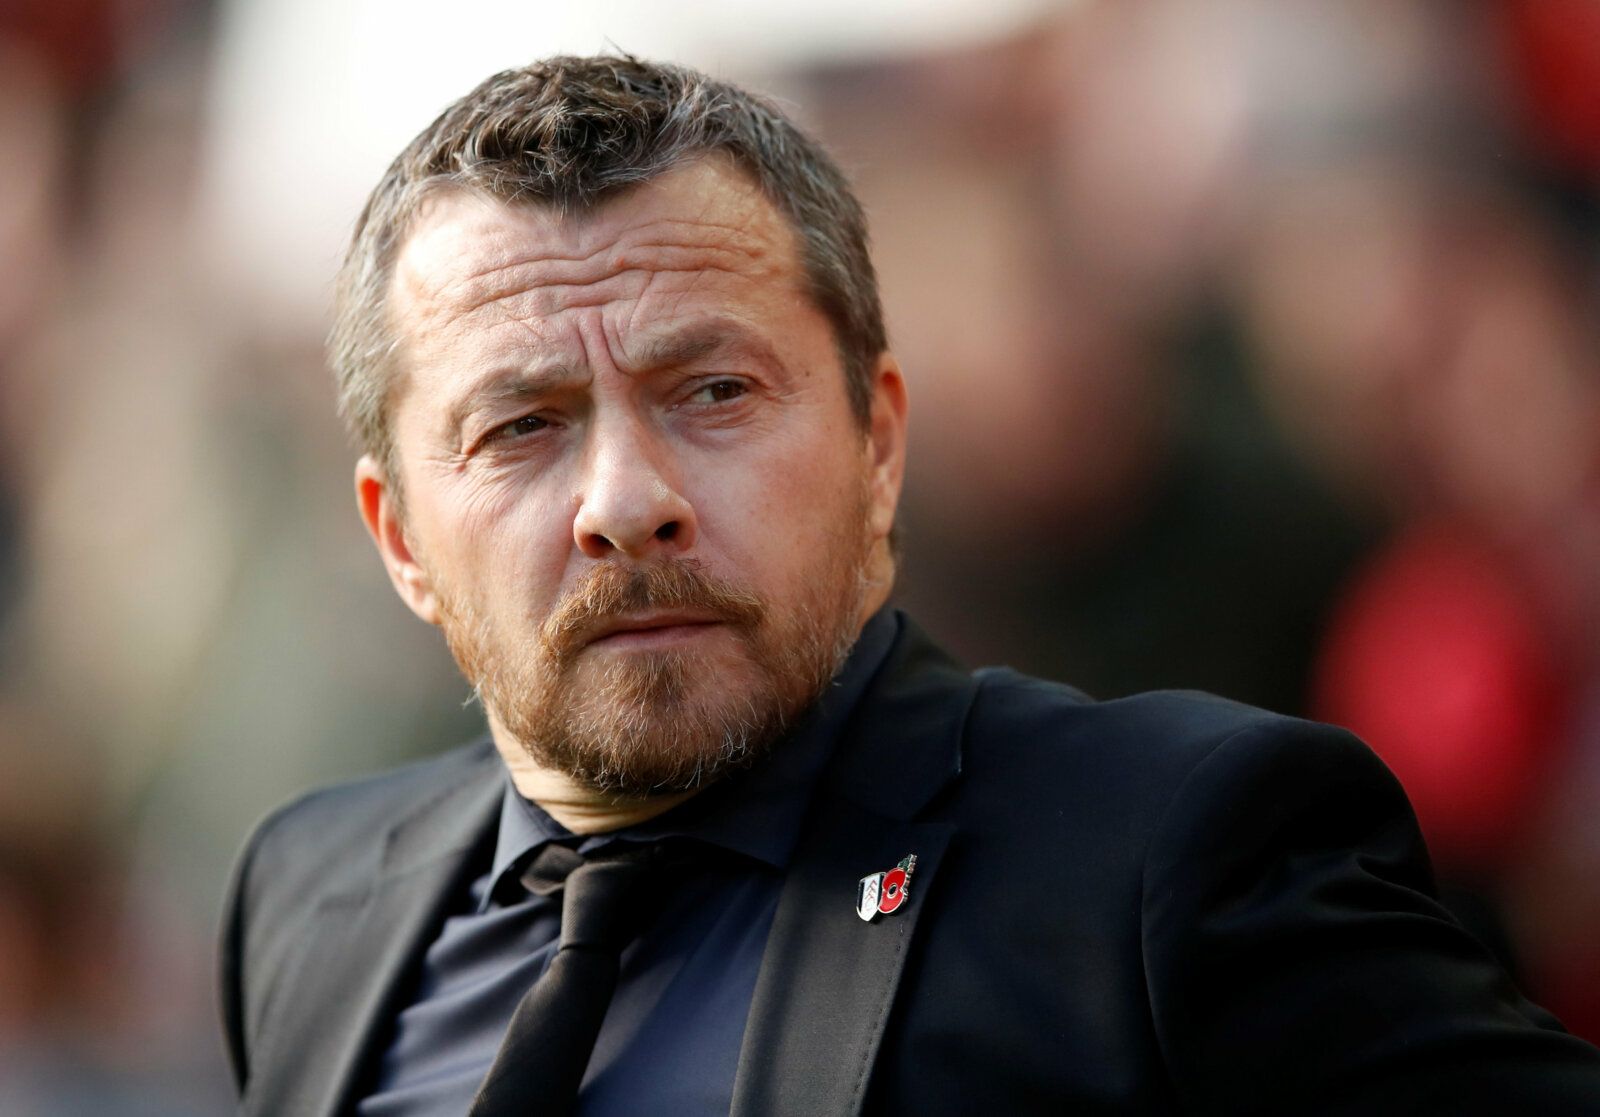 Soccer Football - Premier League - Liverpool v Fulham - Anfield, Liverpool, Britain - November 11, 2018  Fulham manager Slavisa Jokanovic       Action Images via Reuters/Andrew Boyers  EDITORIAL USE ONLY. No use with unauthorized audio, video, data, fixture lists, club/league logos or 